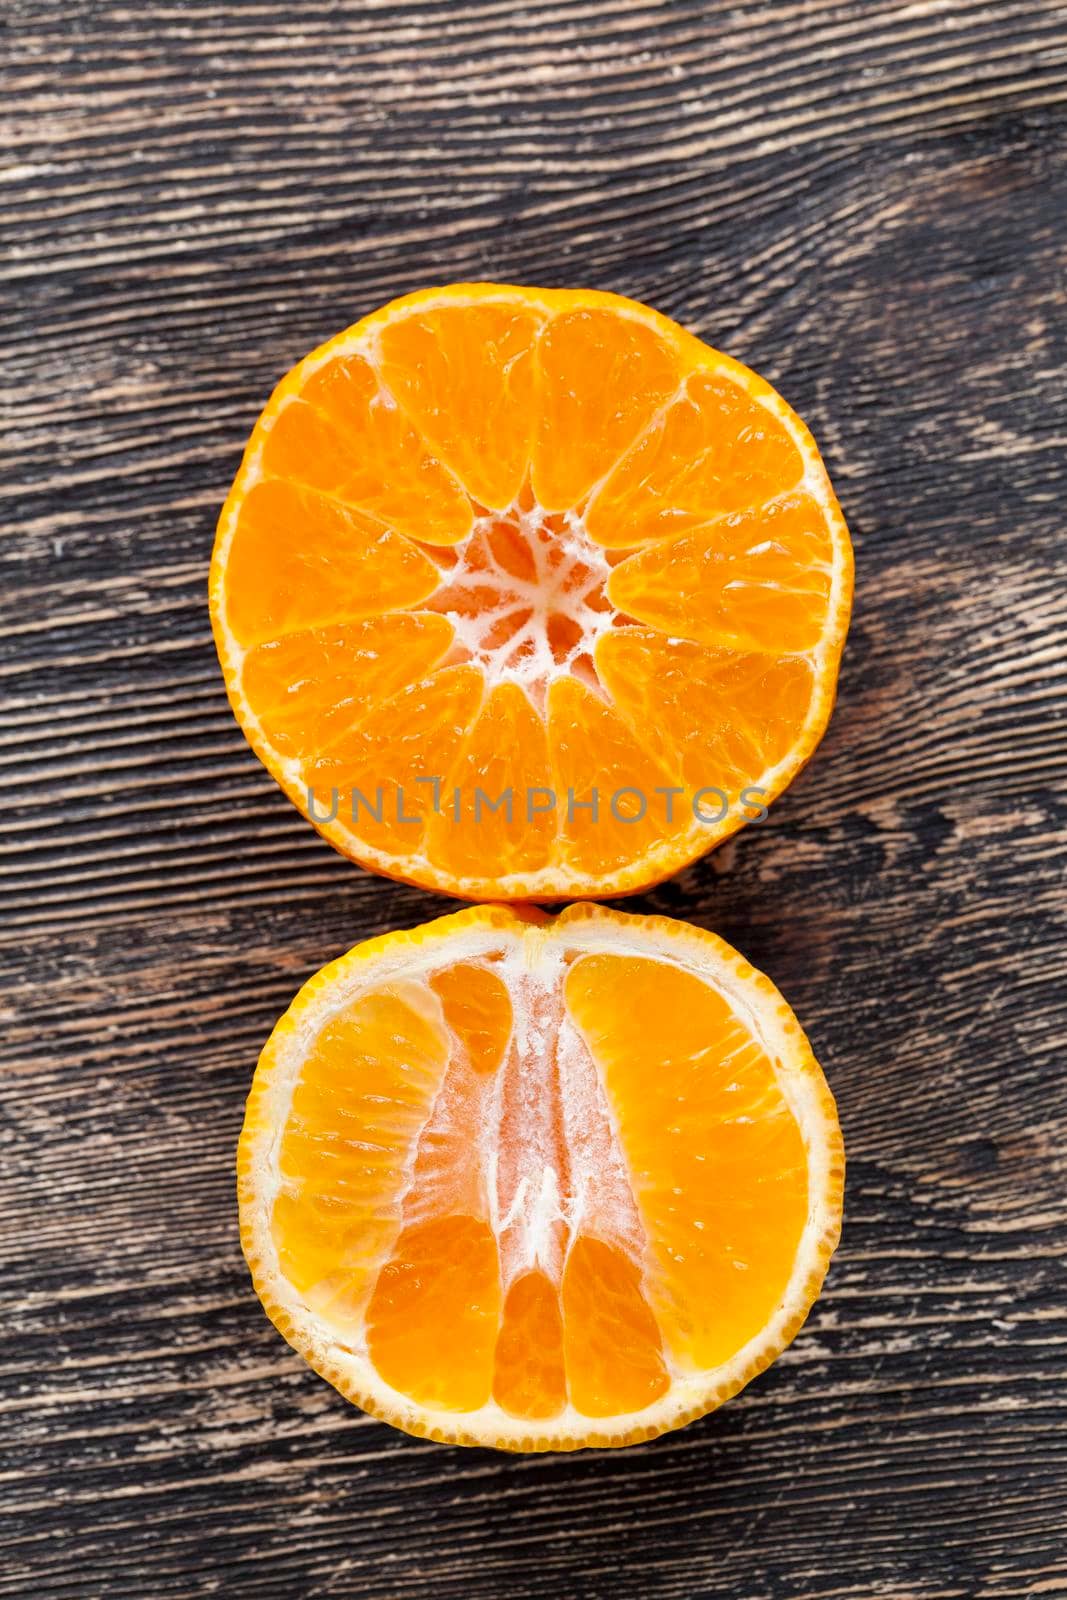 delicious tangerines by avq